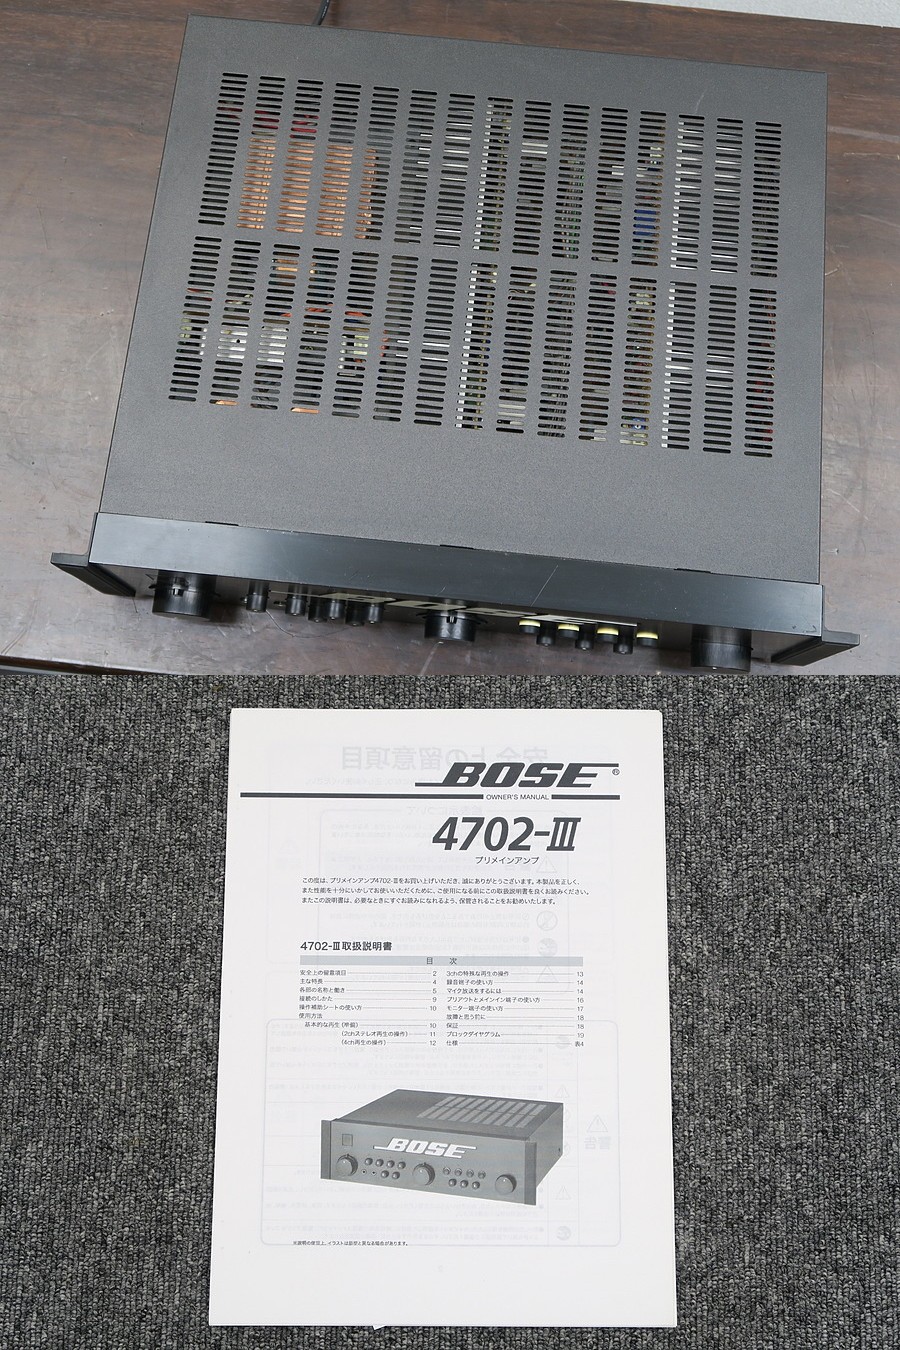 Bose Bose 4702 Pre Main Amplifier Real Yahoo Auction Salling